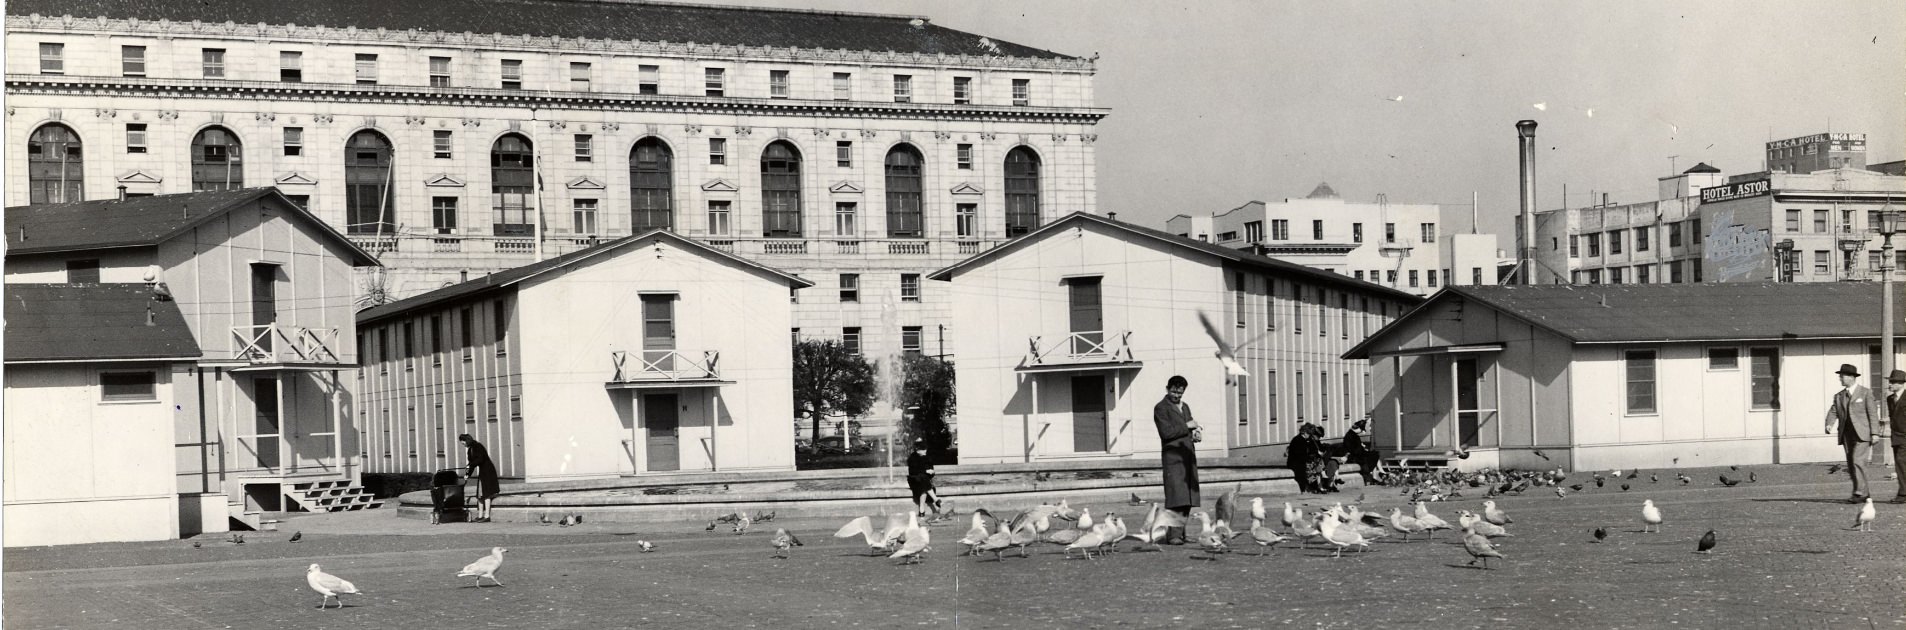 Pigeons and seagulls in Civic Center Plaza with Temporary Barracks, 1944